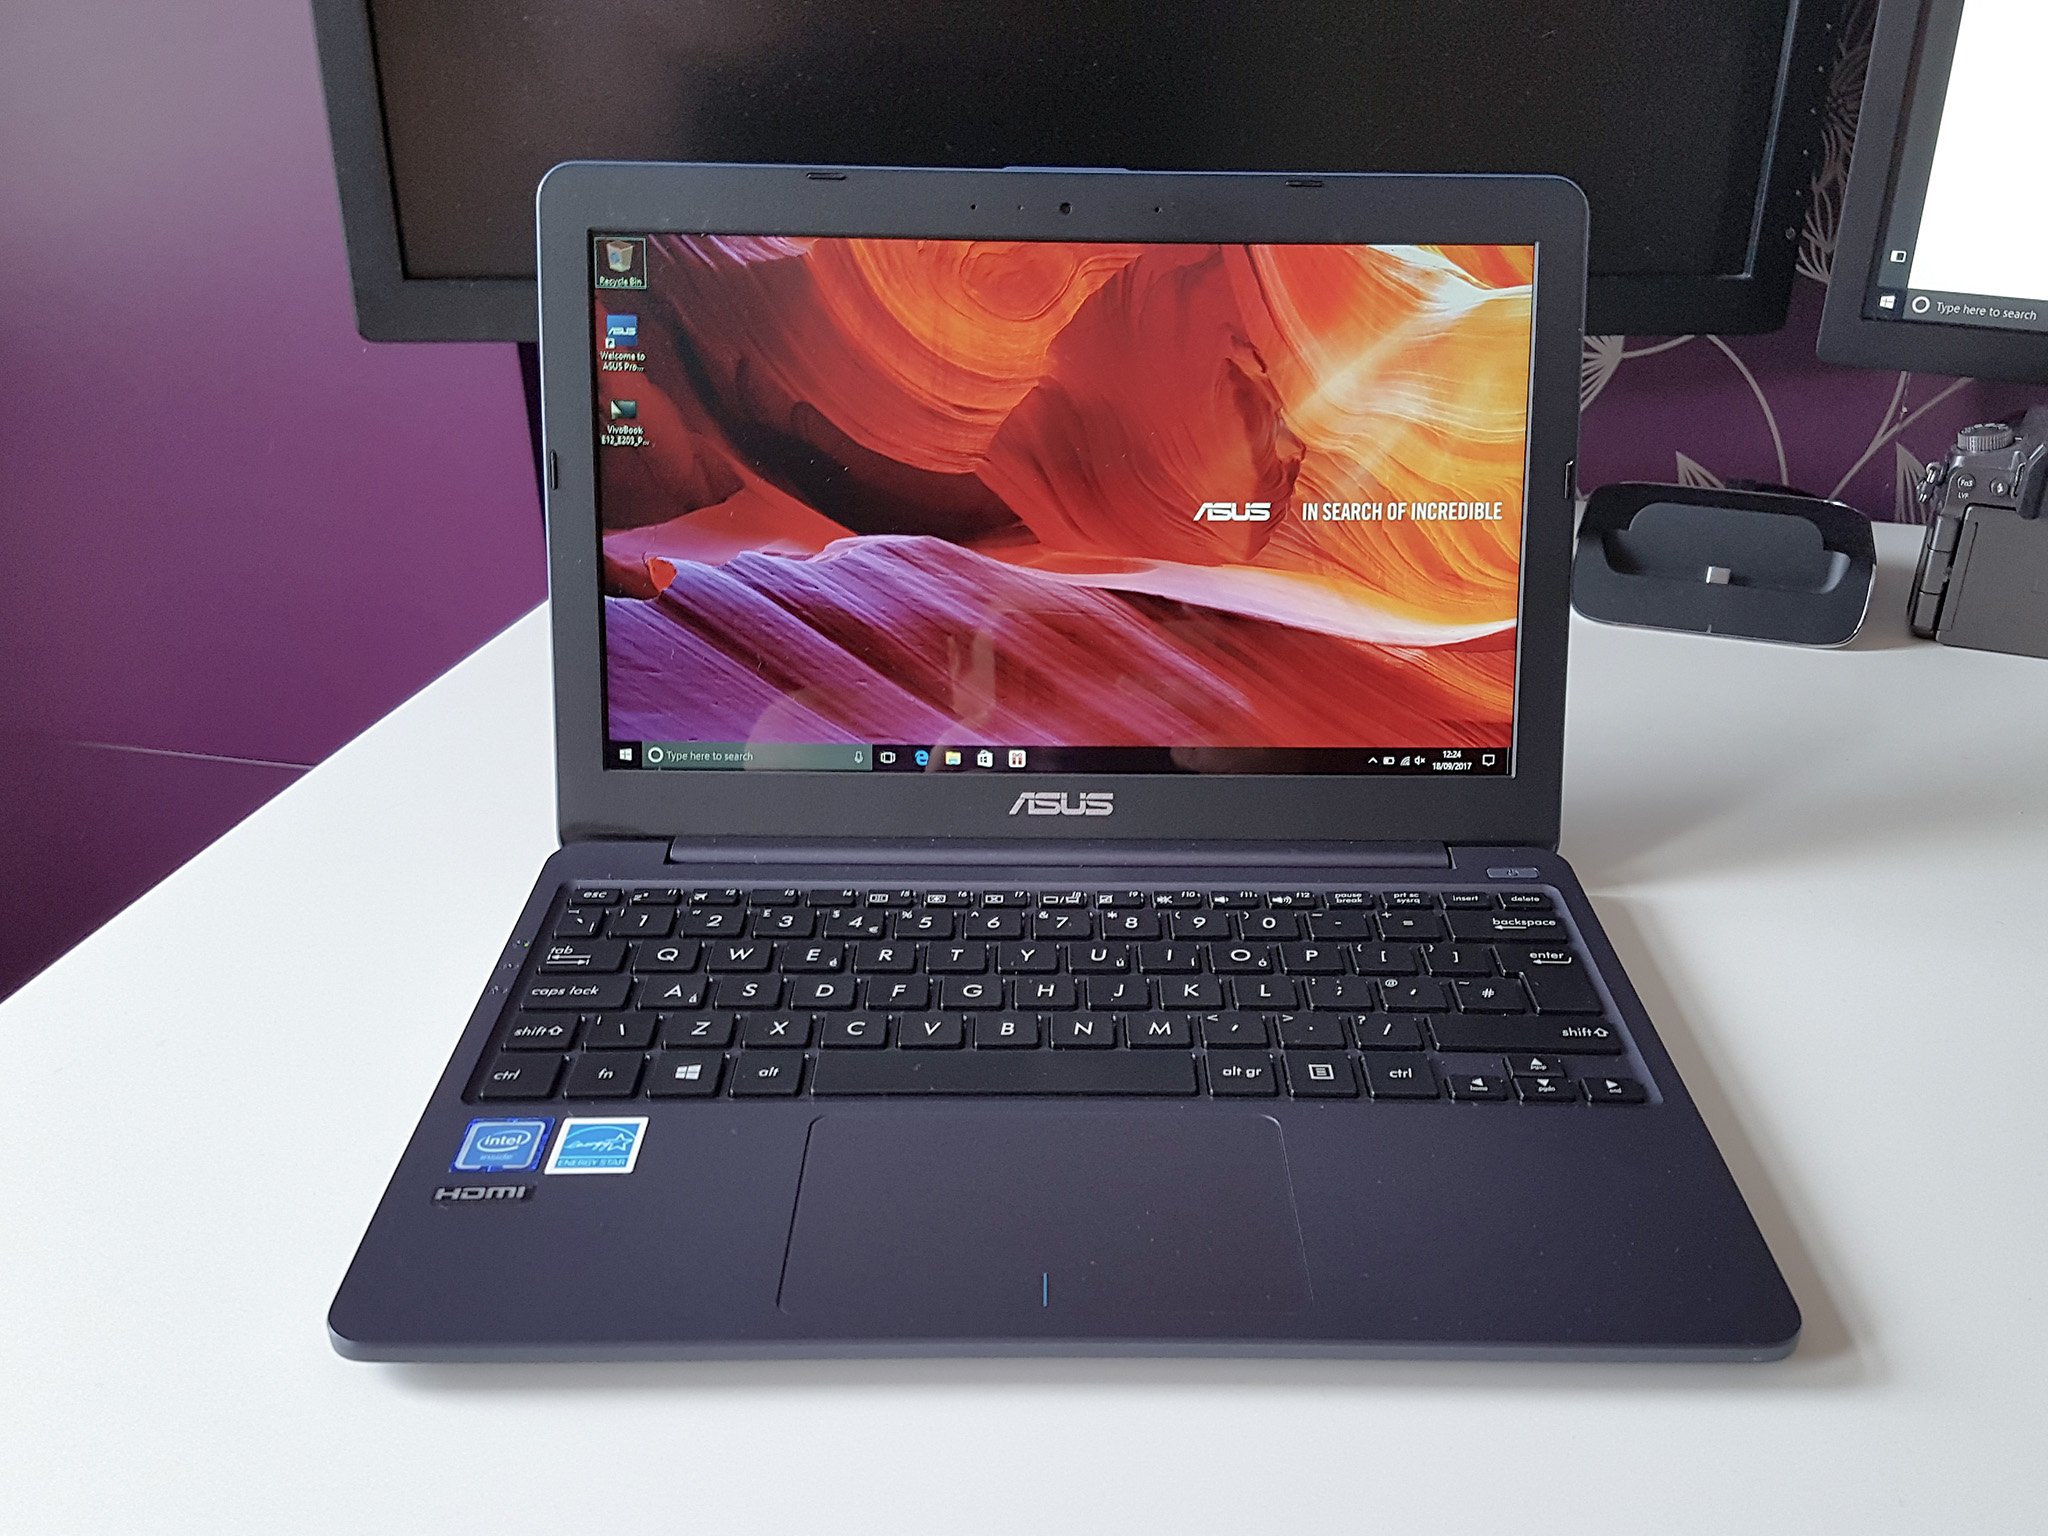 The ASUS VivoBook E203 is a nice update to one of our favorite 